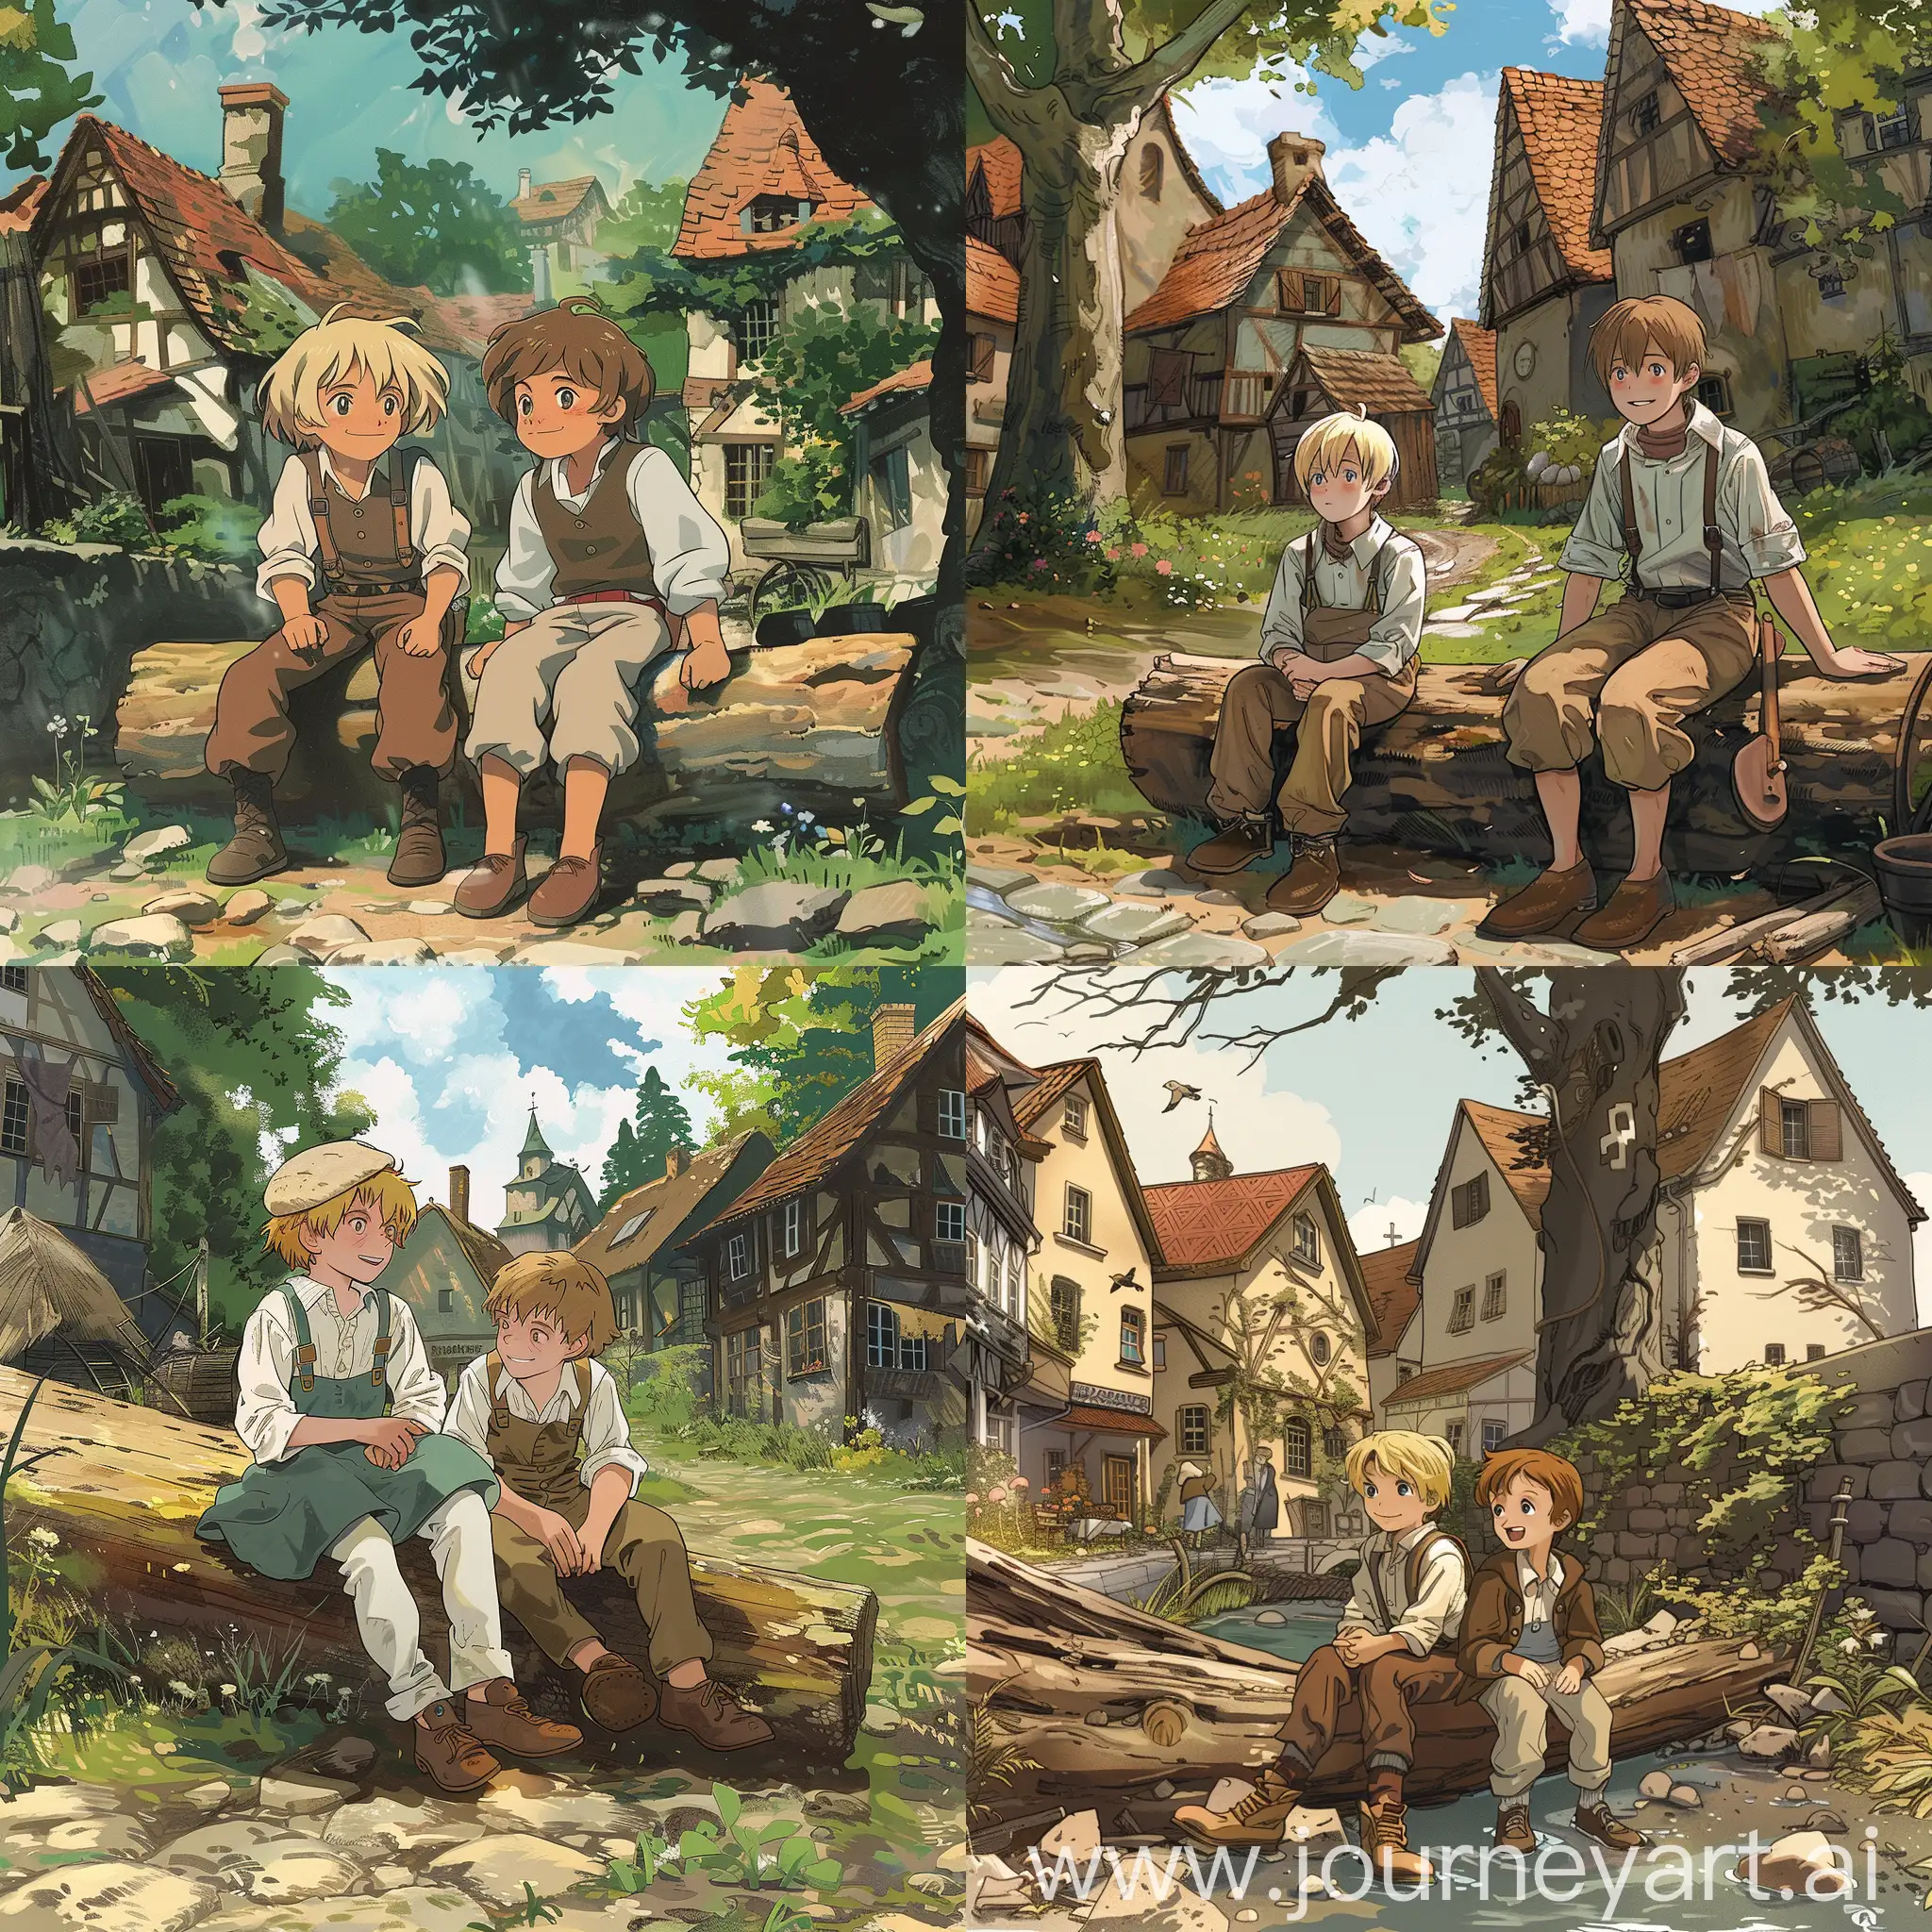 A blonde boy and a brow haired boy sitting on a log in a small german village, 1800s time, ghibli style, anime style